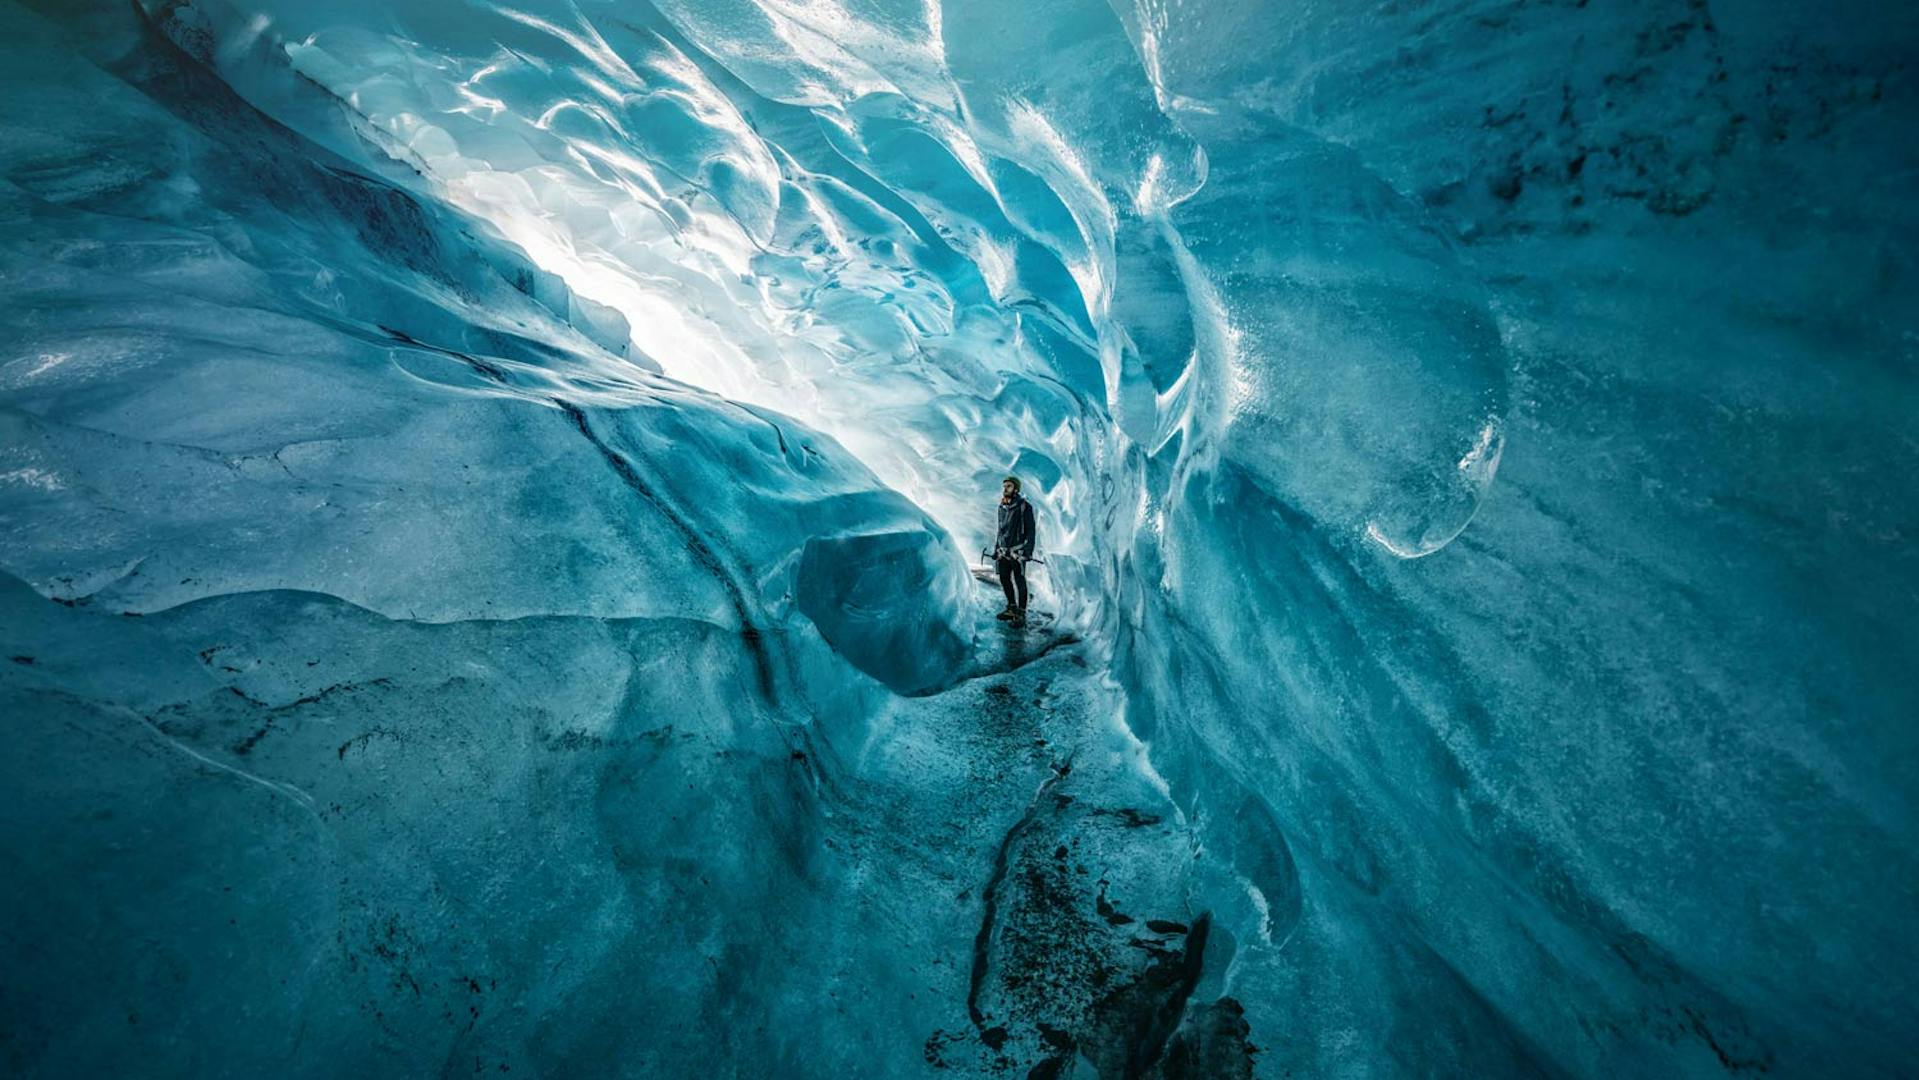 Person looking at the blue ice inside an ice cave.